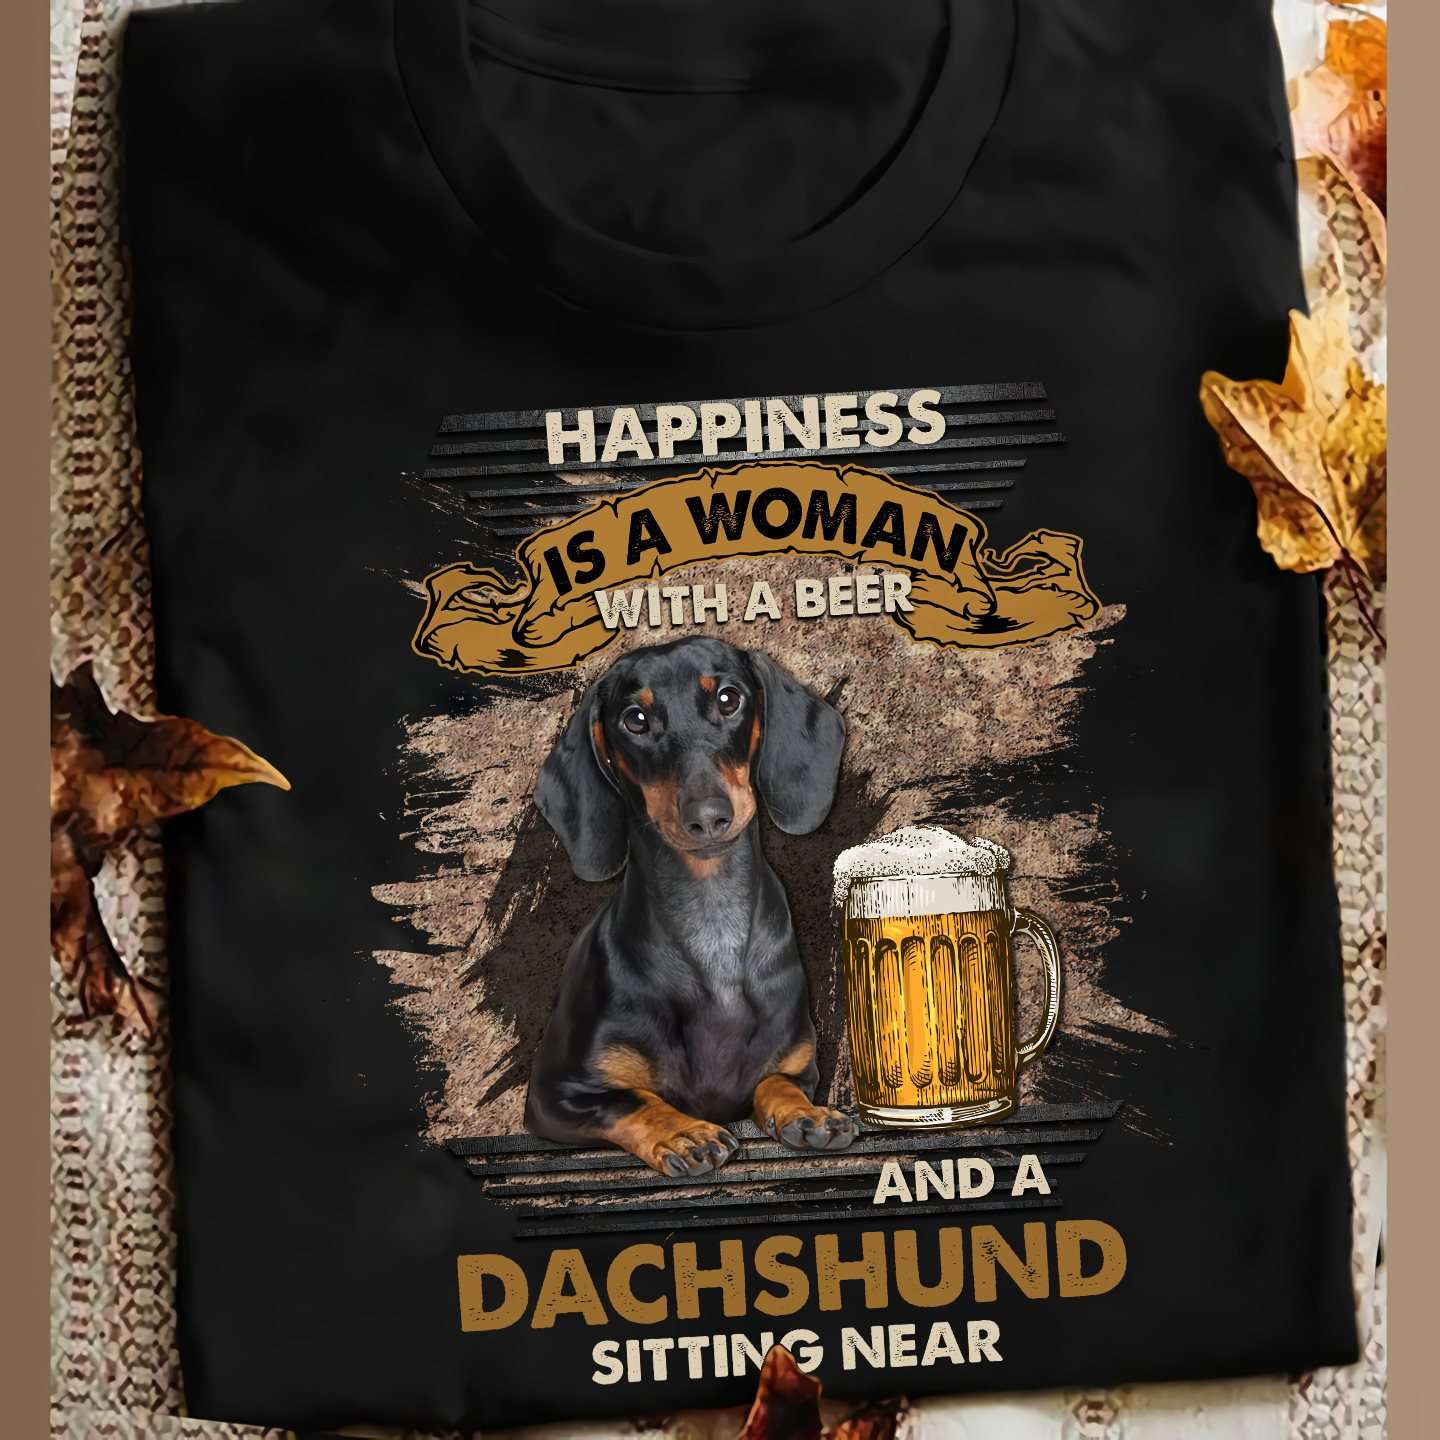 Dachshund Beer - Happiness is a woman with a beer and a dachshund sitting near